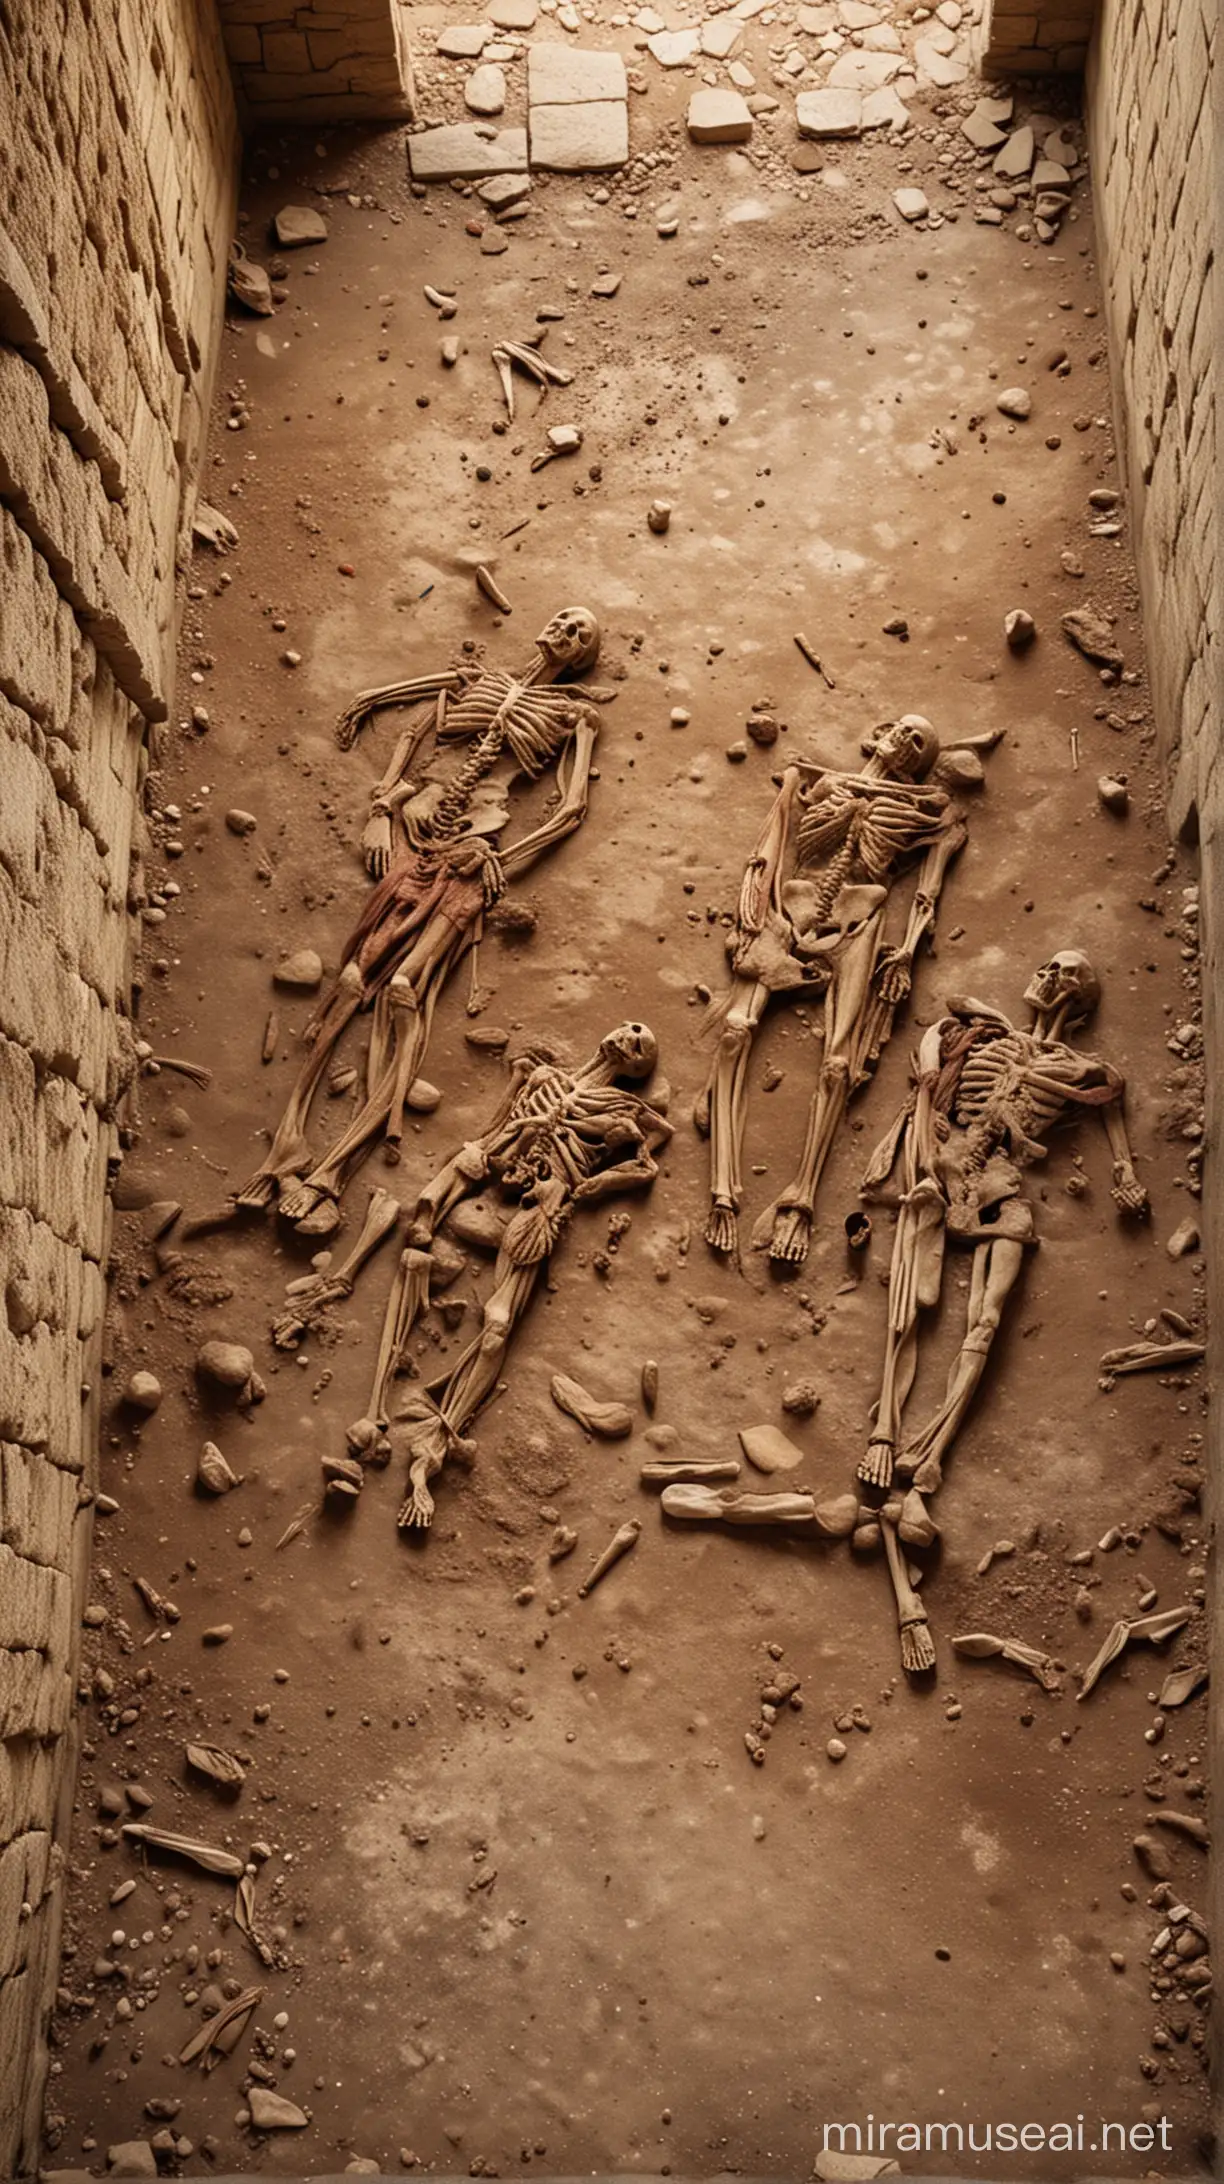 Dead bodies on the floor in ancient world 